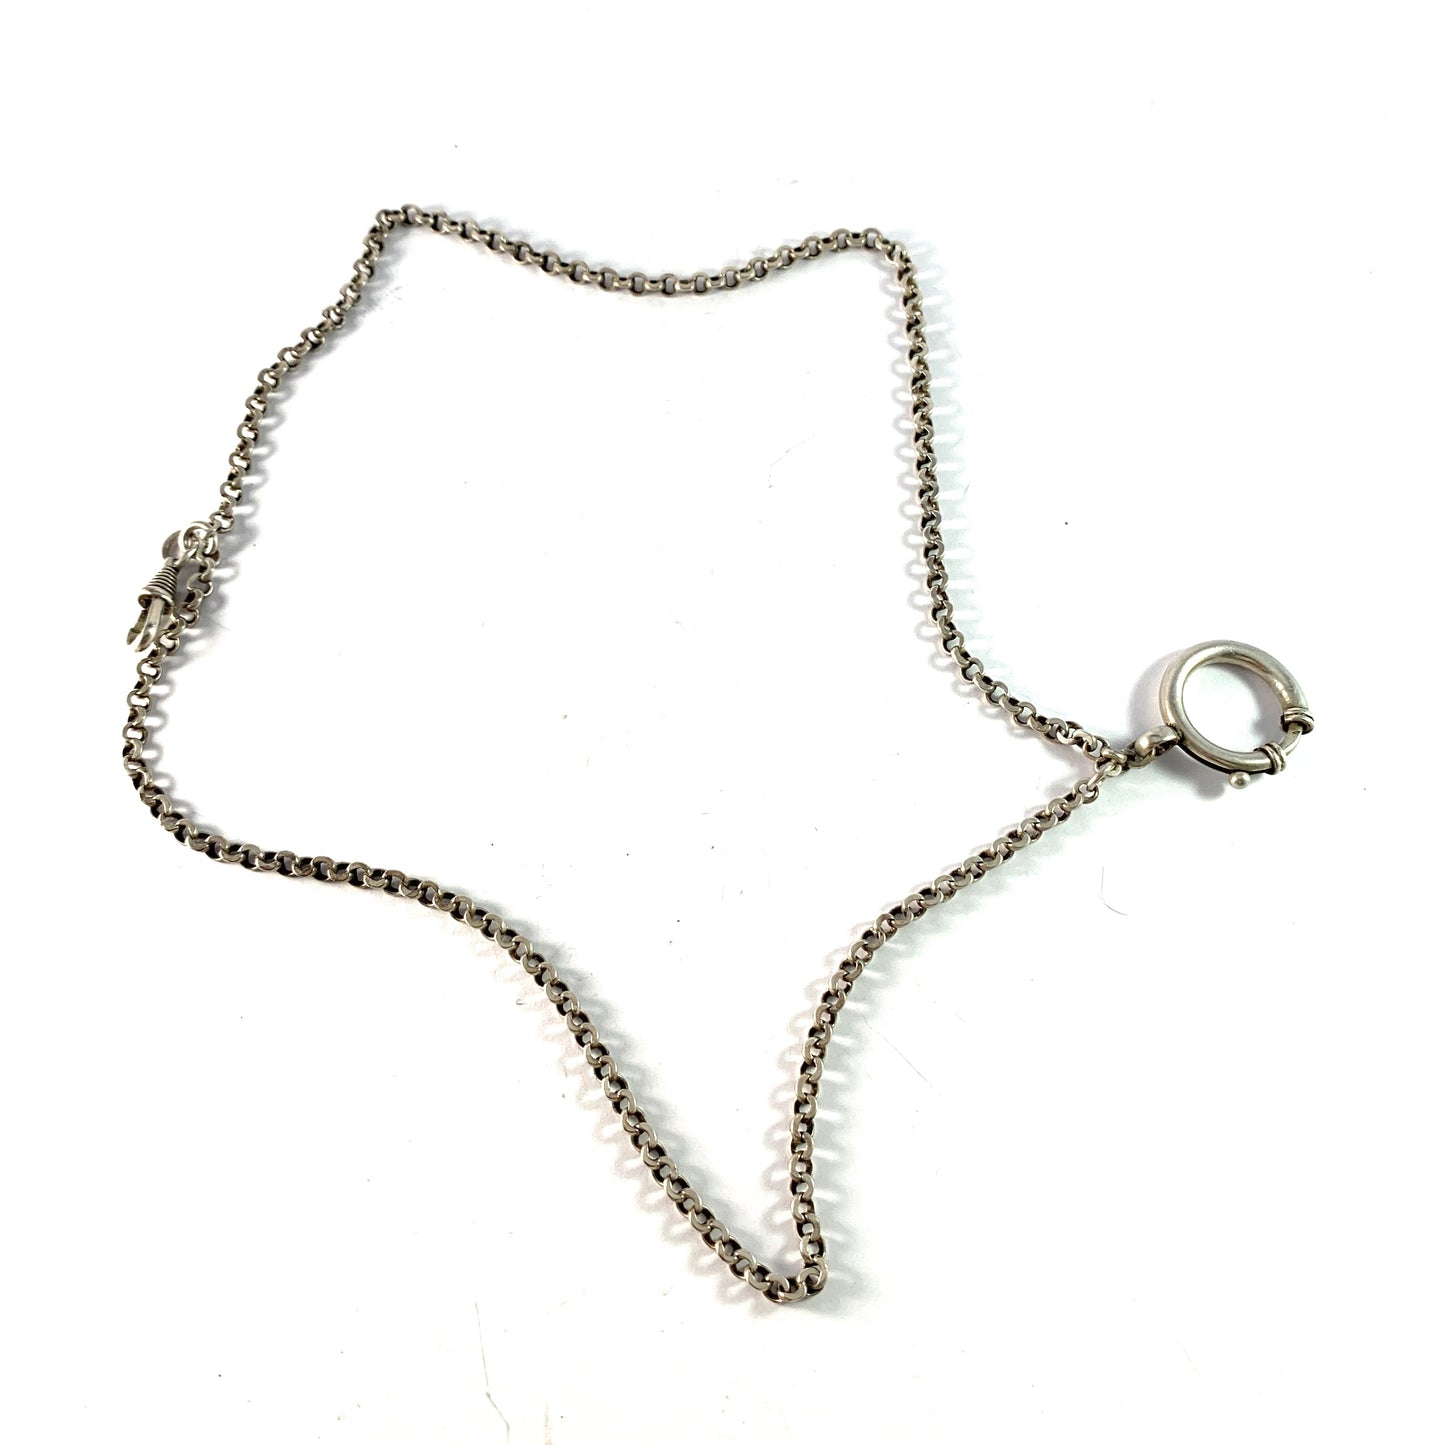 Sweden c 1930s Solid Silver Pocket Watch Chain.